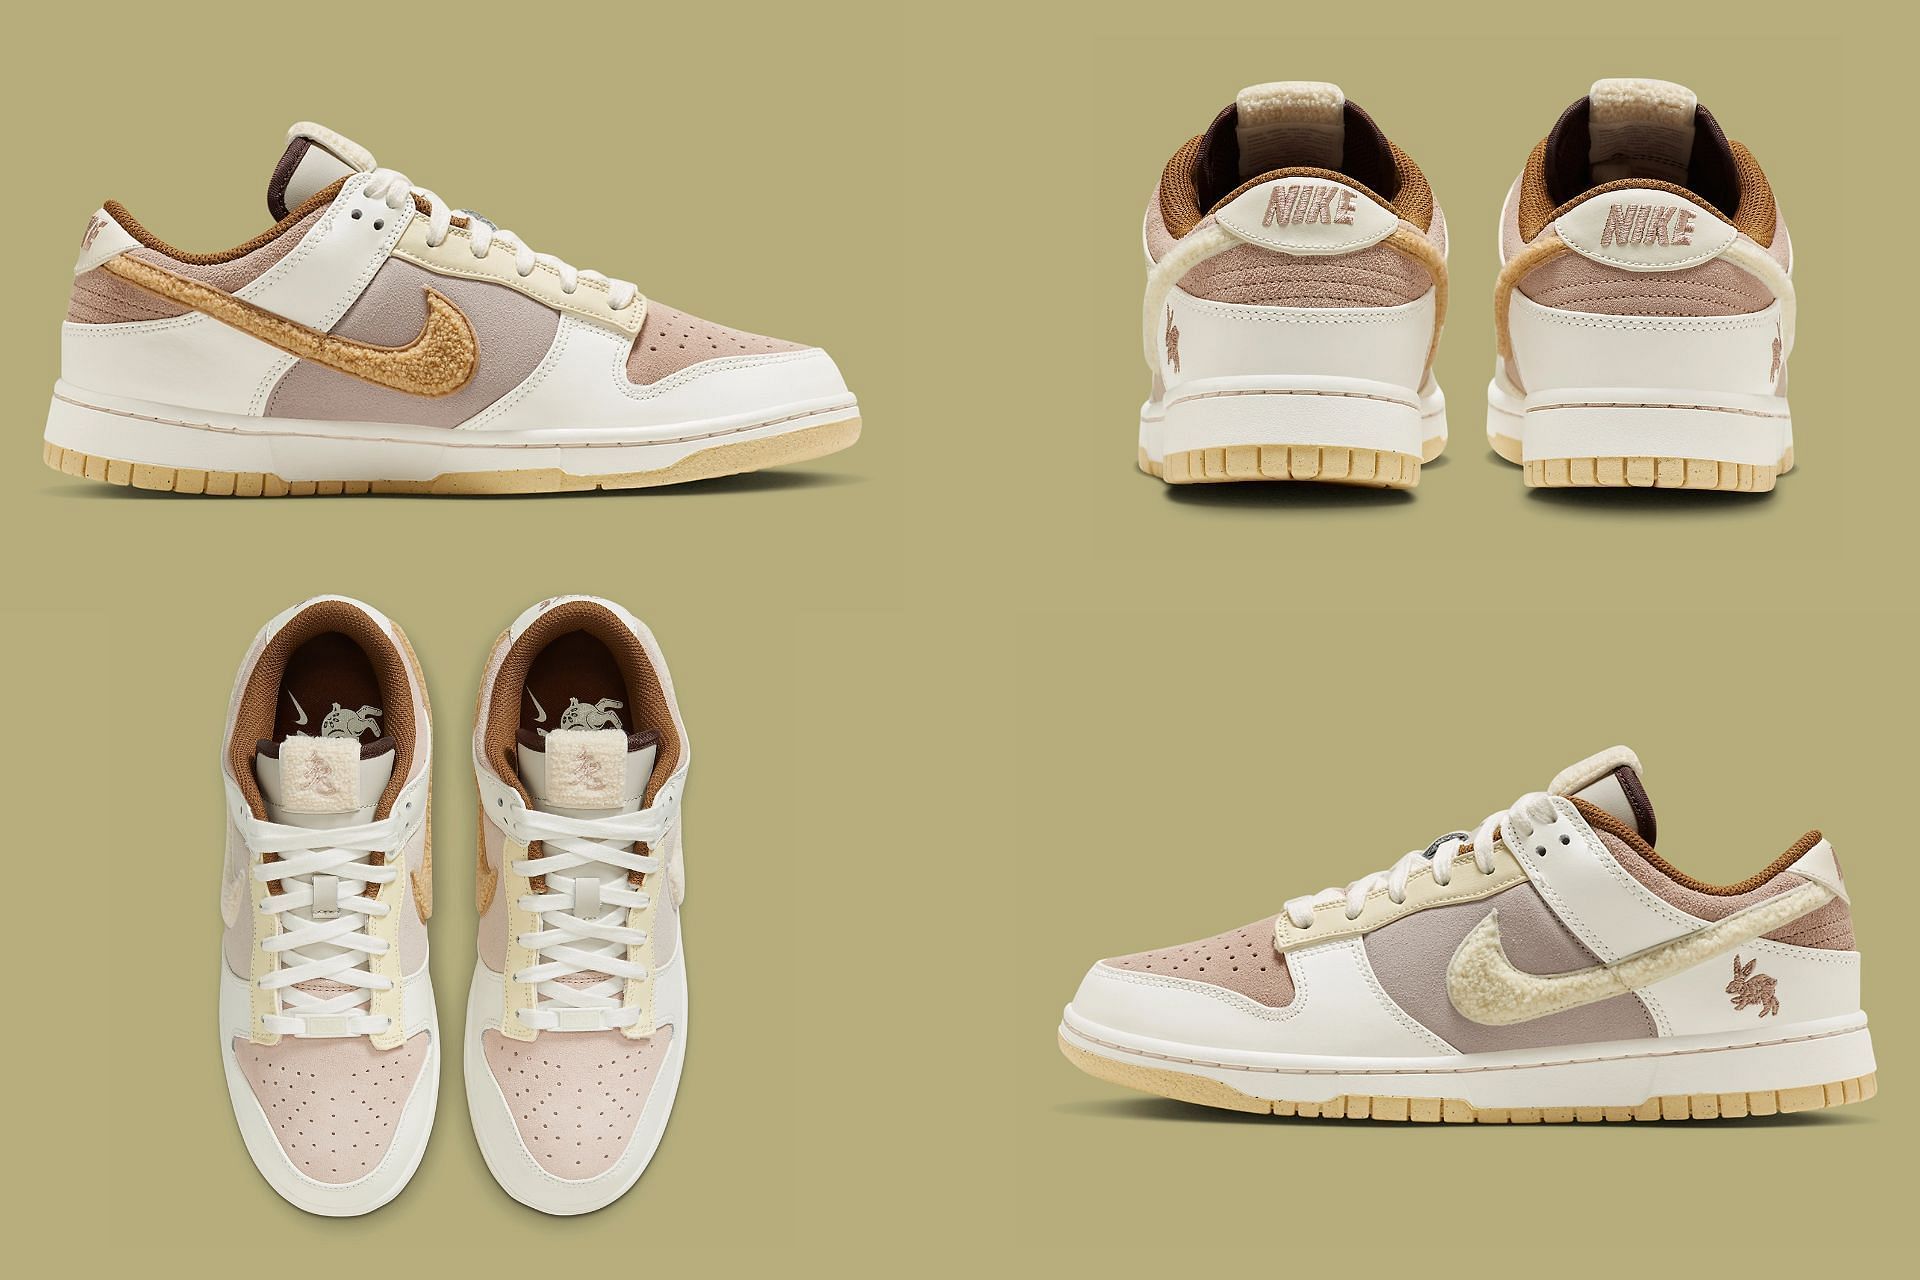 The upcoming Nike Dunk Low &quot;Year of the Rabbit&quot; Taupe sneakers will be released to honor the Chinese Lunar New Year (Image via Sportskeeda)